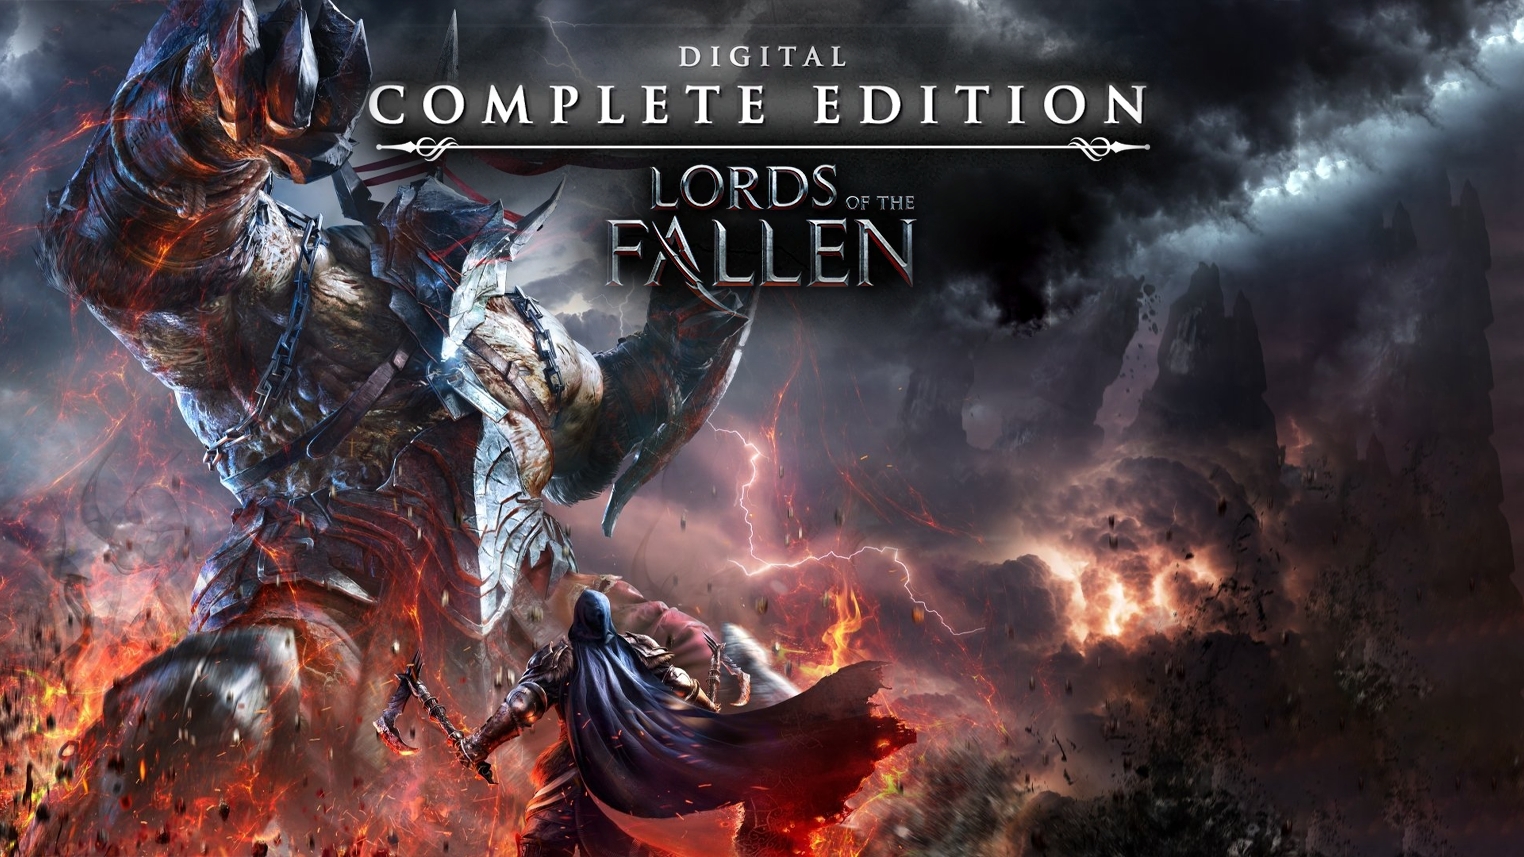 Lords of the Fallen - Legendary Pack - Epic Games Store